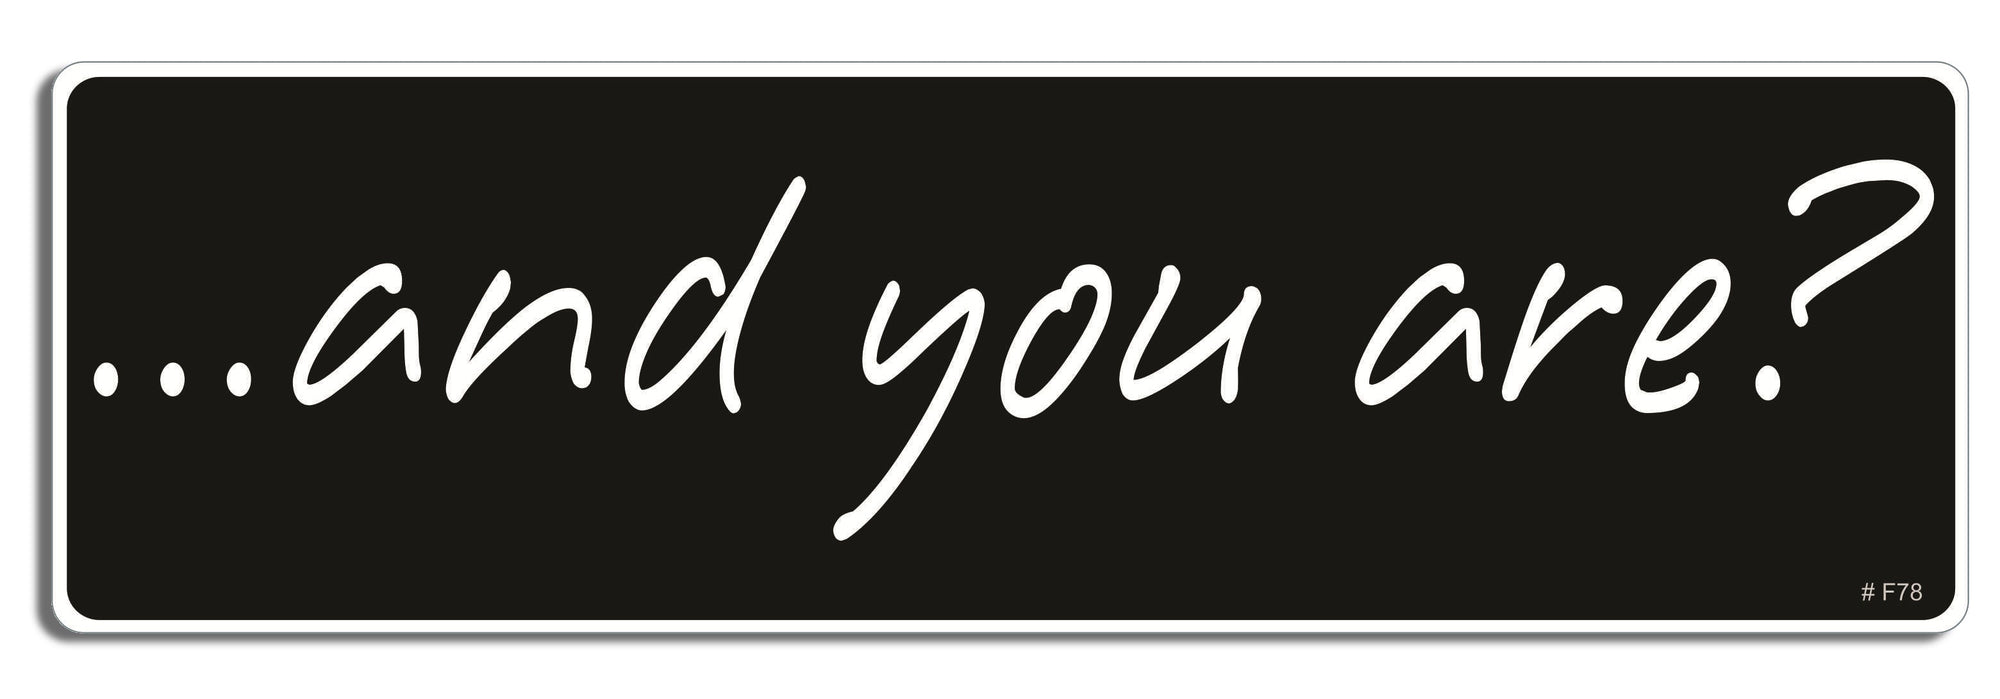 and you are? - 3" x 10" Bumper Sticker--Car Magnet- -  Decal Bumper Sticker-funny Bumper Sticker Car Magnet and you are?-    Decal for cars funny, funny quote, funny saying